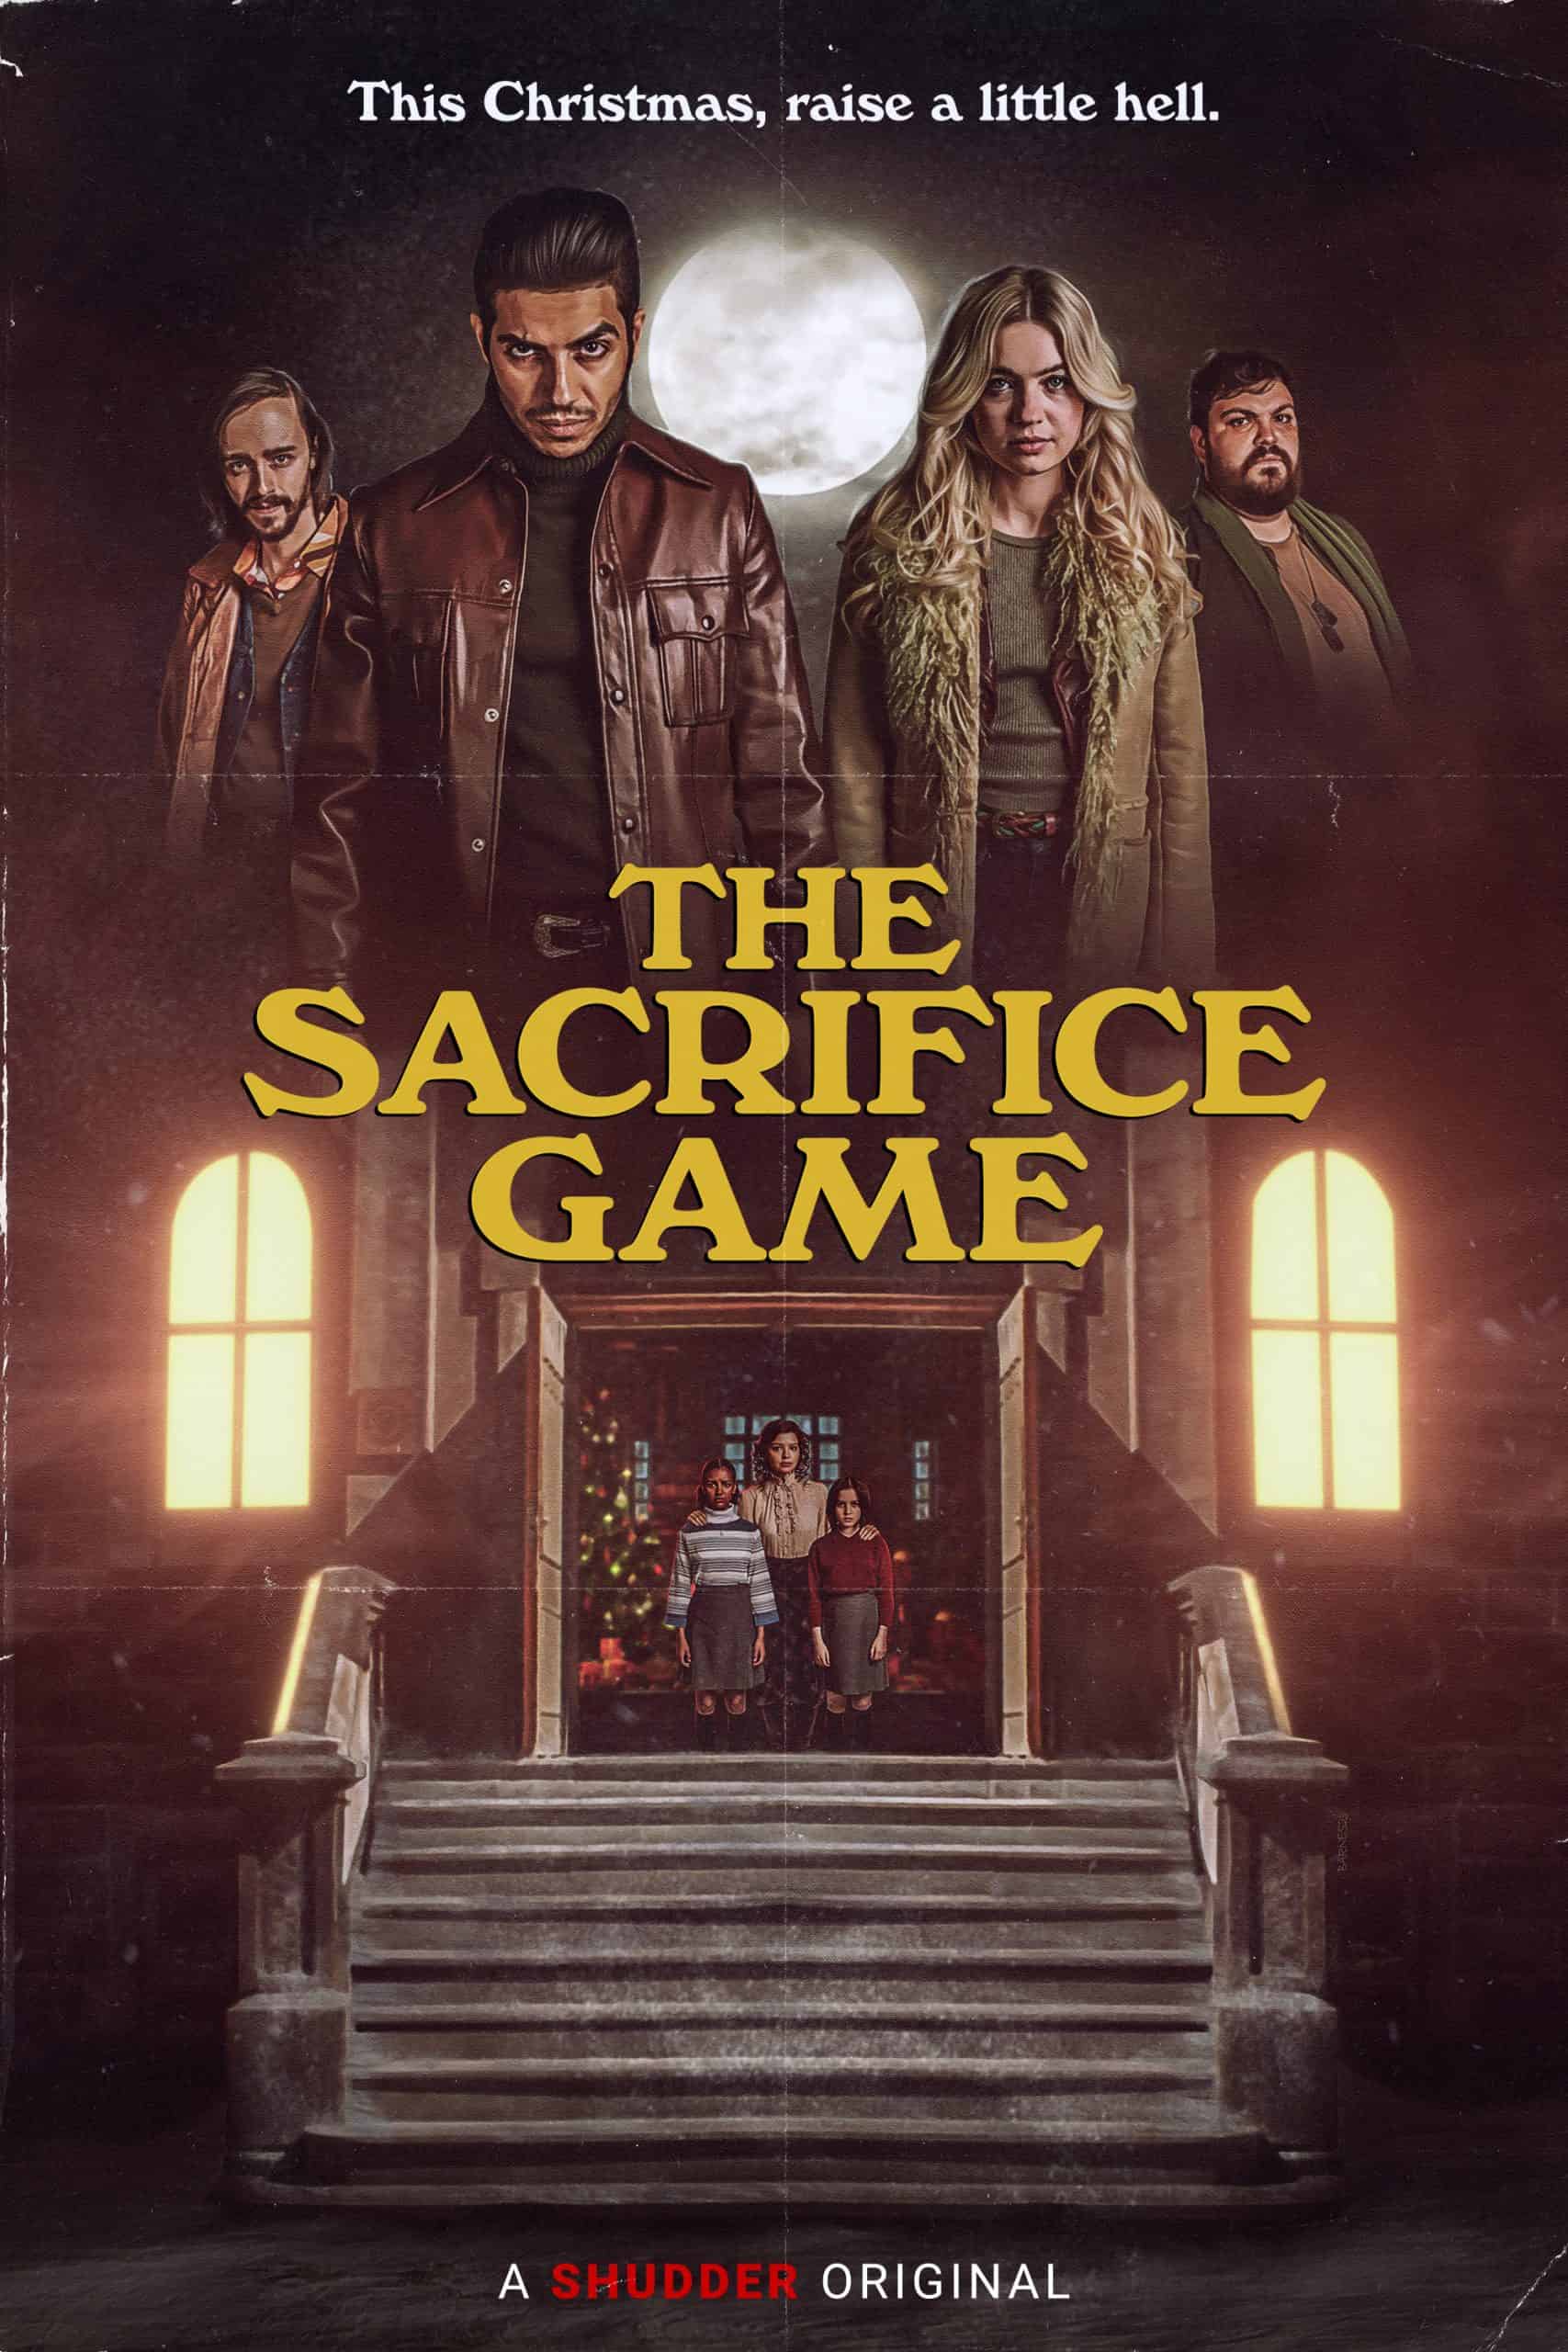 The Sacrifice Game: A Chilling Holiday Thriller Streaming on Shudder 66